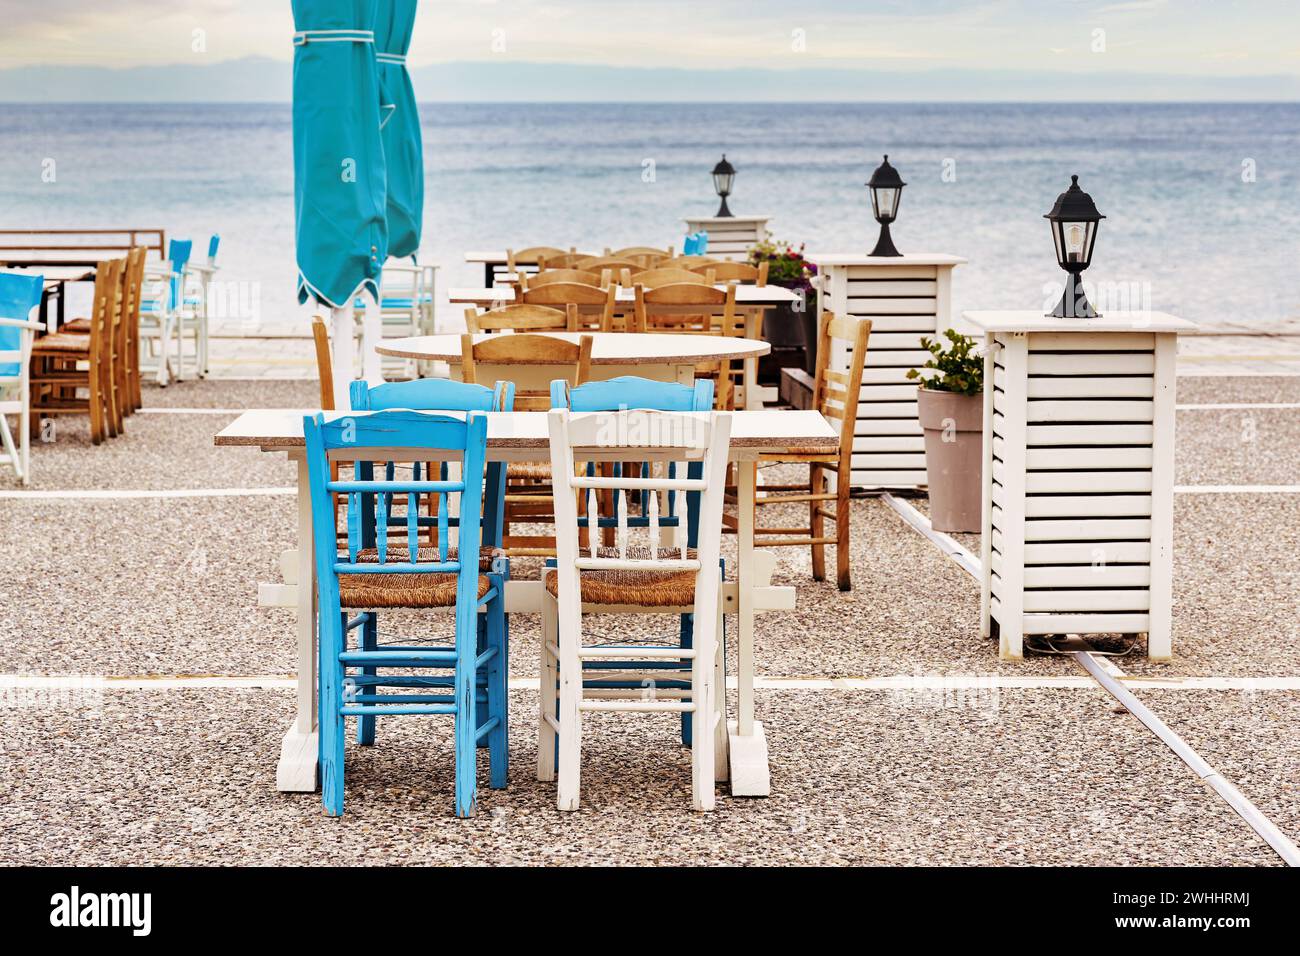 Wooden chairs and tables in blue and white in a taverna on the terrace next to the sea, tourist destination in Chalkidiki, Greec Stock Photo